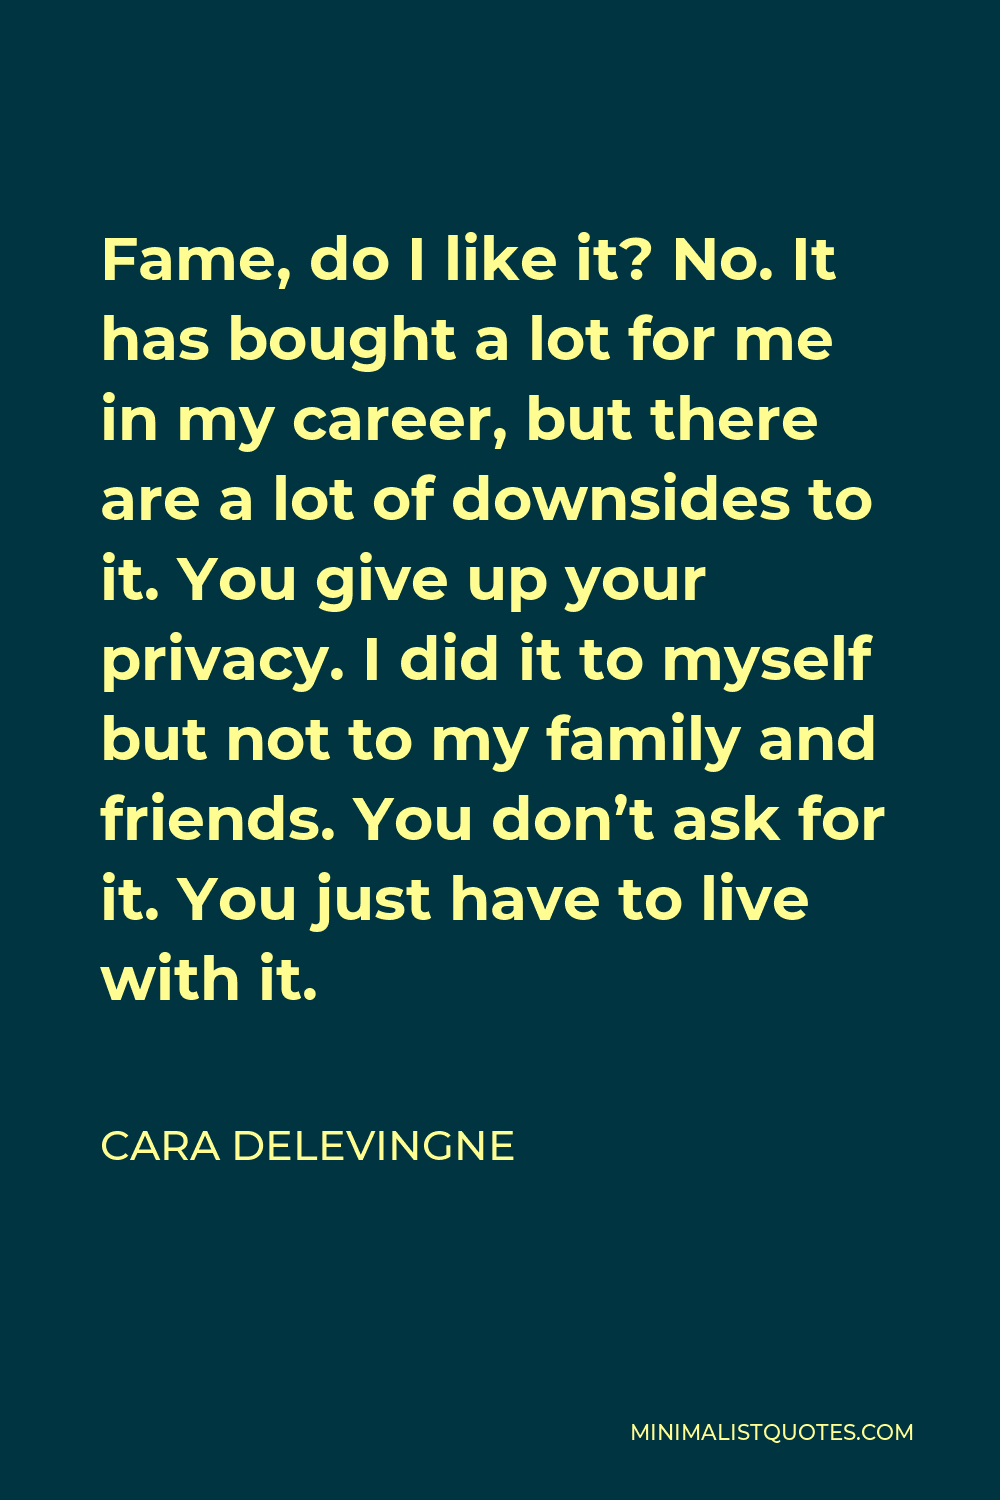 Cara Delevingne Quote - Fame, do I like it? No. It has bought a lot for me in my career, but there are a lot of downsides to it. You give up your privacy. I did it to myself but not to my family and friends. You don’t ask for it. You just have to live with it.